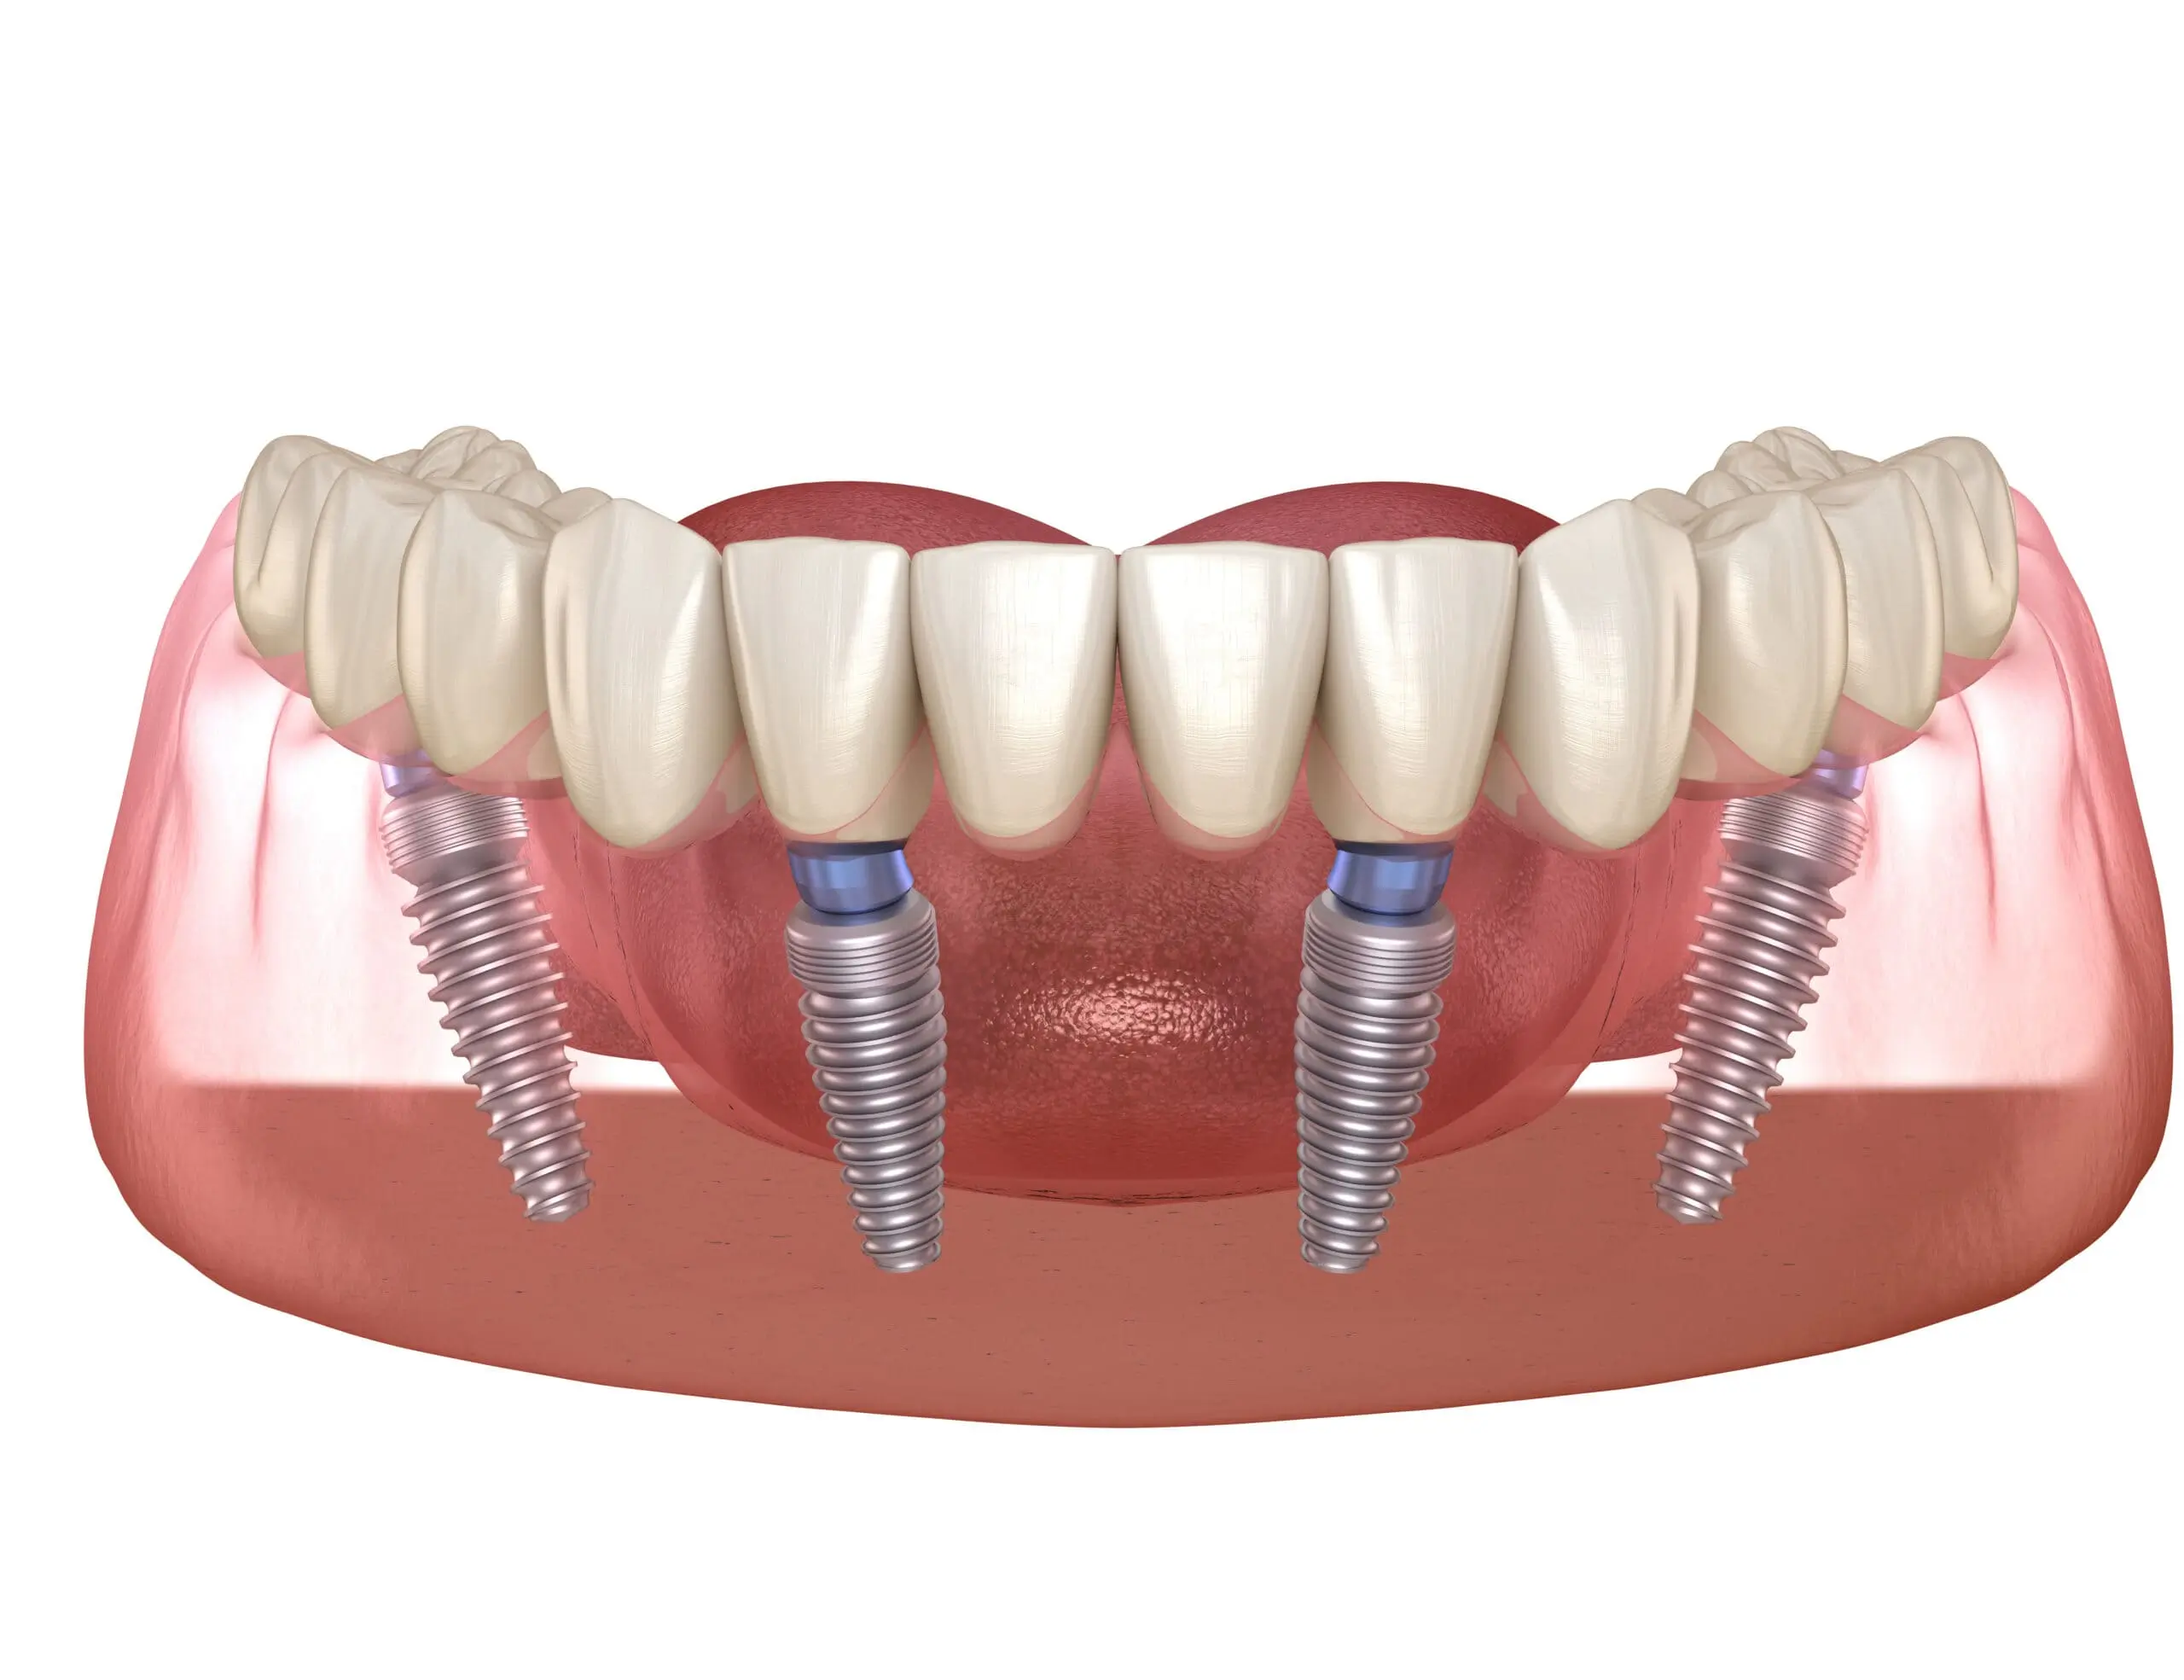 TeethNow Dental Implant Centers-Mandibular prosthesis All on 4 system supported by implants. Medically accurate 3D illustration of human teeth and dentures concept